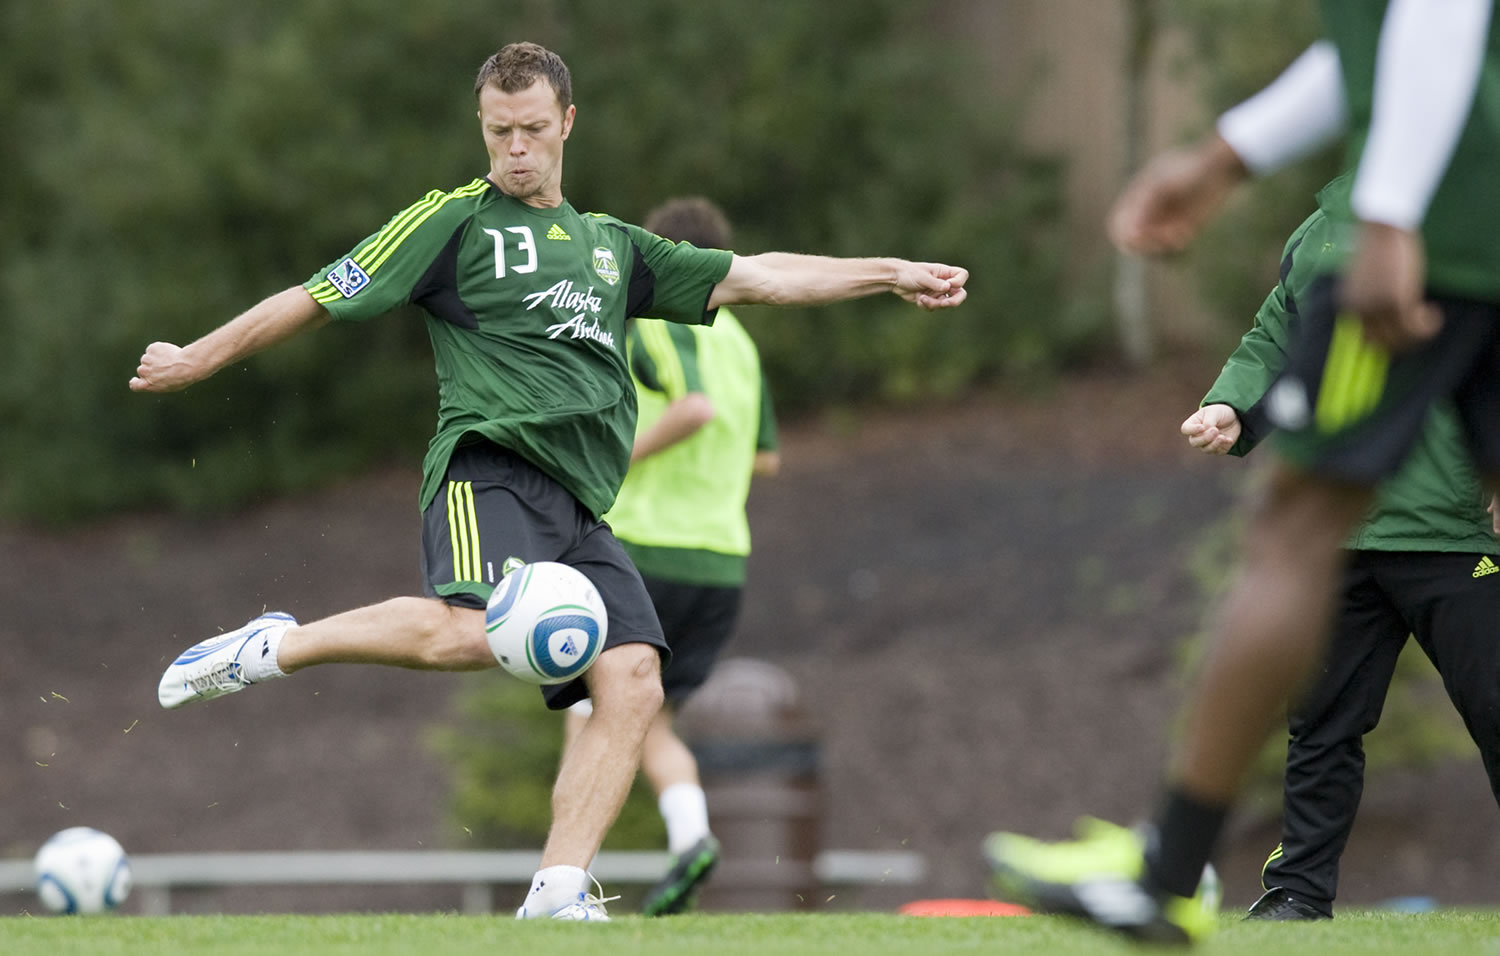 Jack Jewsbury says Saturday's game against FC Dallas will have a playoff atmosphere for the Portland Timbers.